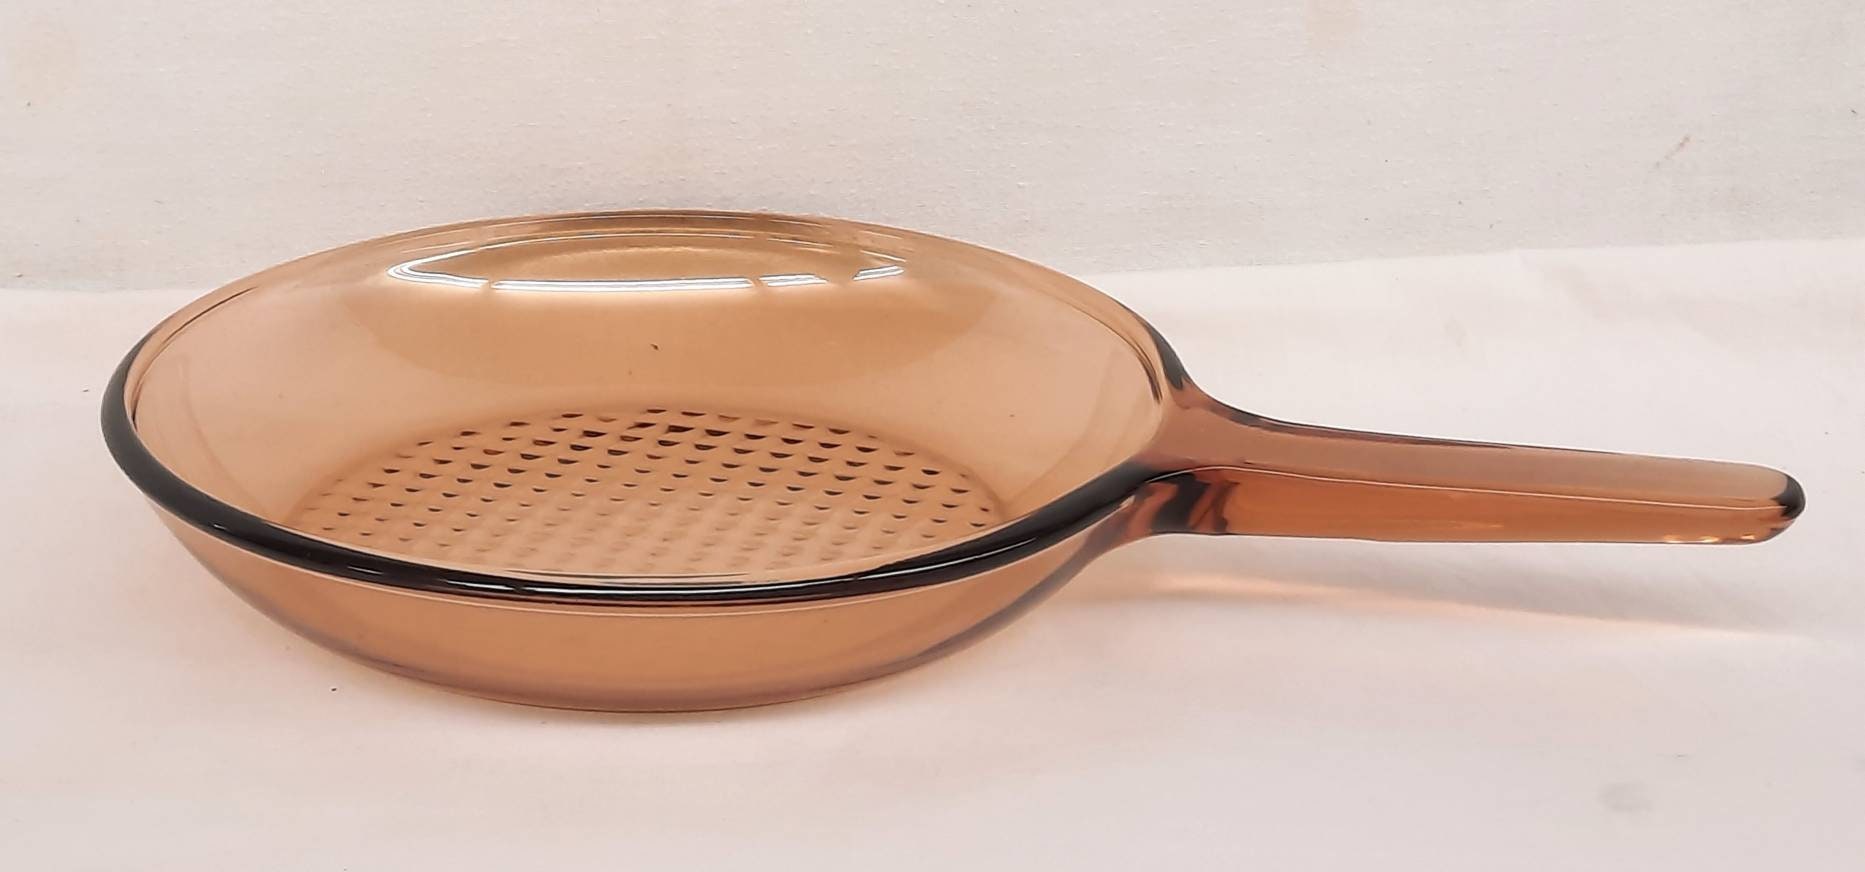 Visions Corning France Amber Glass 7 Inch Skillet Frying Pan Cookware  Visions Corning Ware Brown Glass Pan Oven Safe -  Finland